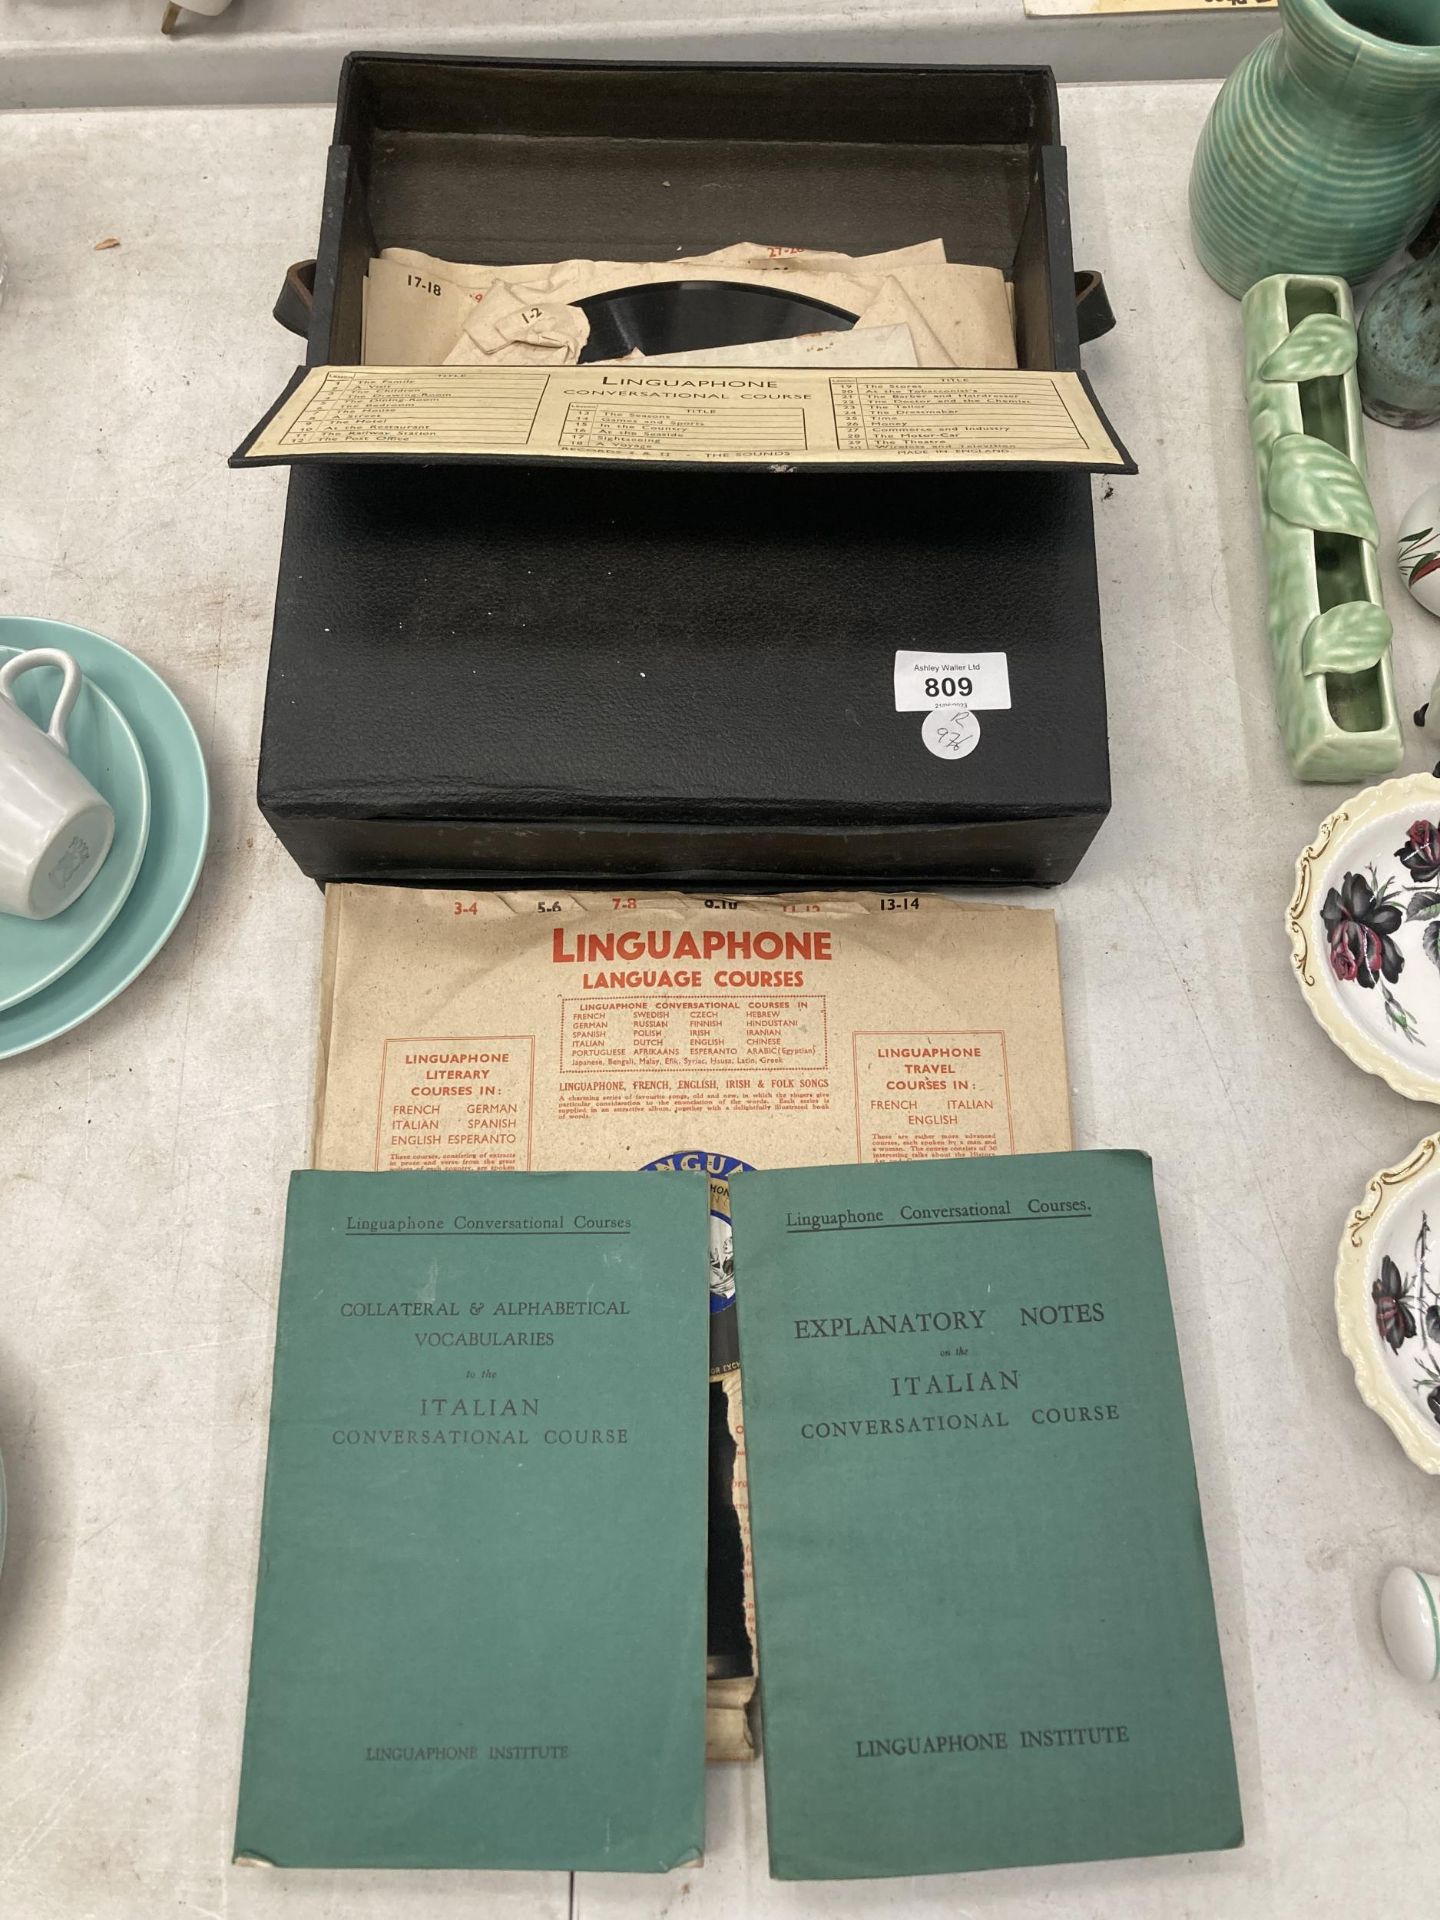 A CASED LINGUAPHONE LANGUAGE RECORDS AND BOOKS